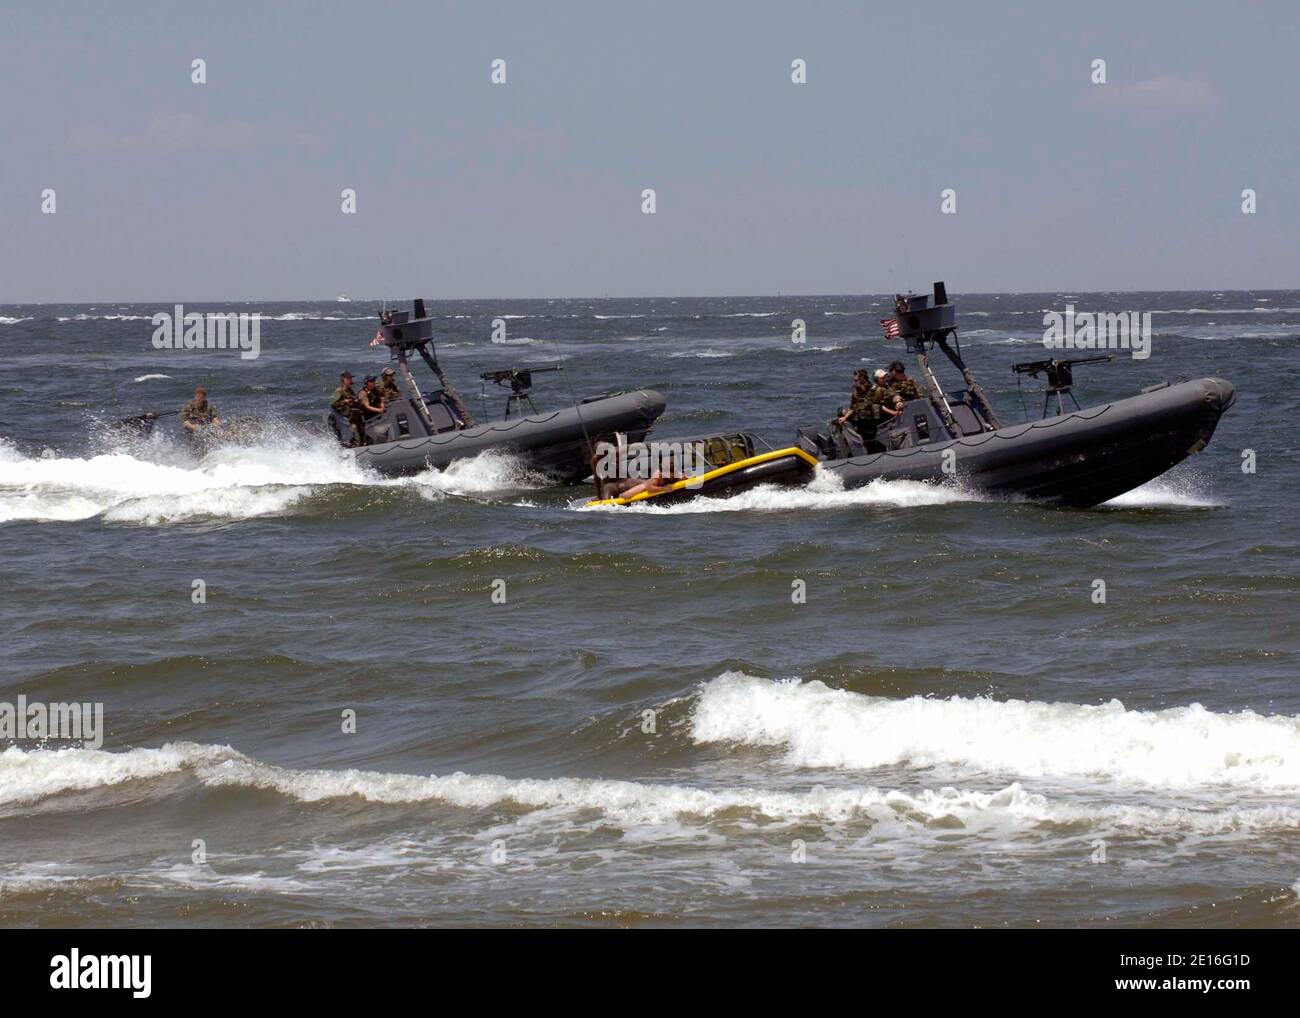 Navy SEALs are extracted from the waters of the Chesapeake Bay into a sling boat being pulled by a rigid hull inflatable boat (RHIB) during a capabilities demonstration at Naval Amphibious Base Little Creek. The Naval Special Warfare community displayed its capabilities as part of the 40th UDT-SEAL East Coast Reunion celebration. Events are planned throughout the weekend to honor UDT/SEAL history, heritage, and families. Photo by USN/ABACAPRESS.COM Stock Photo